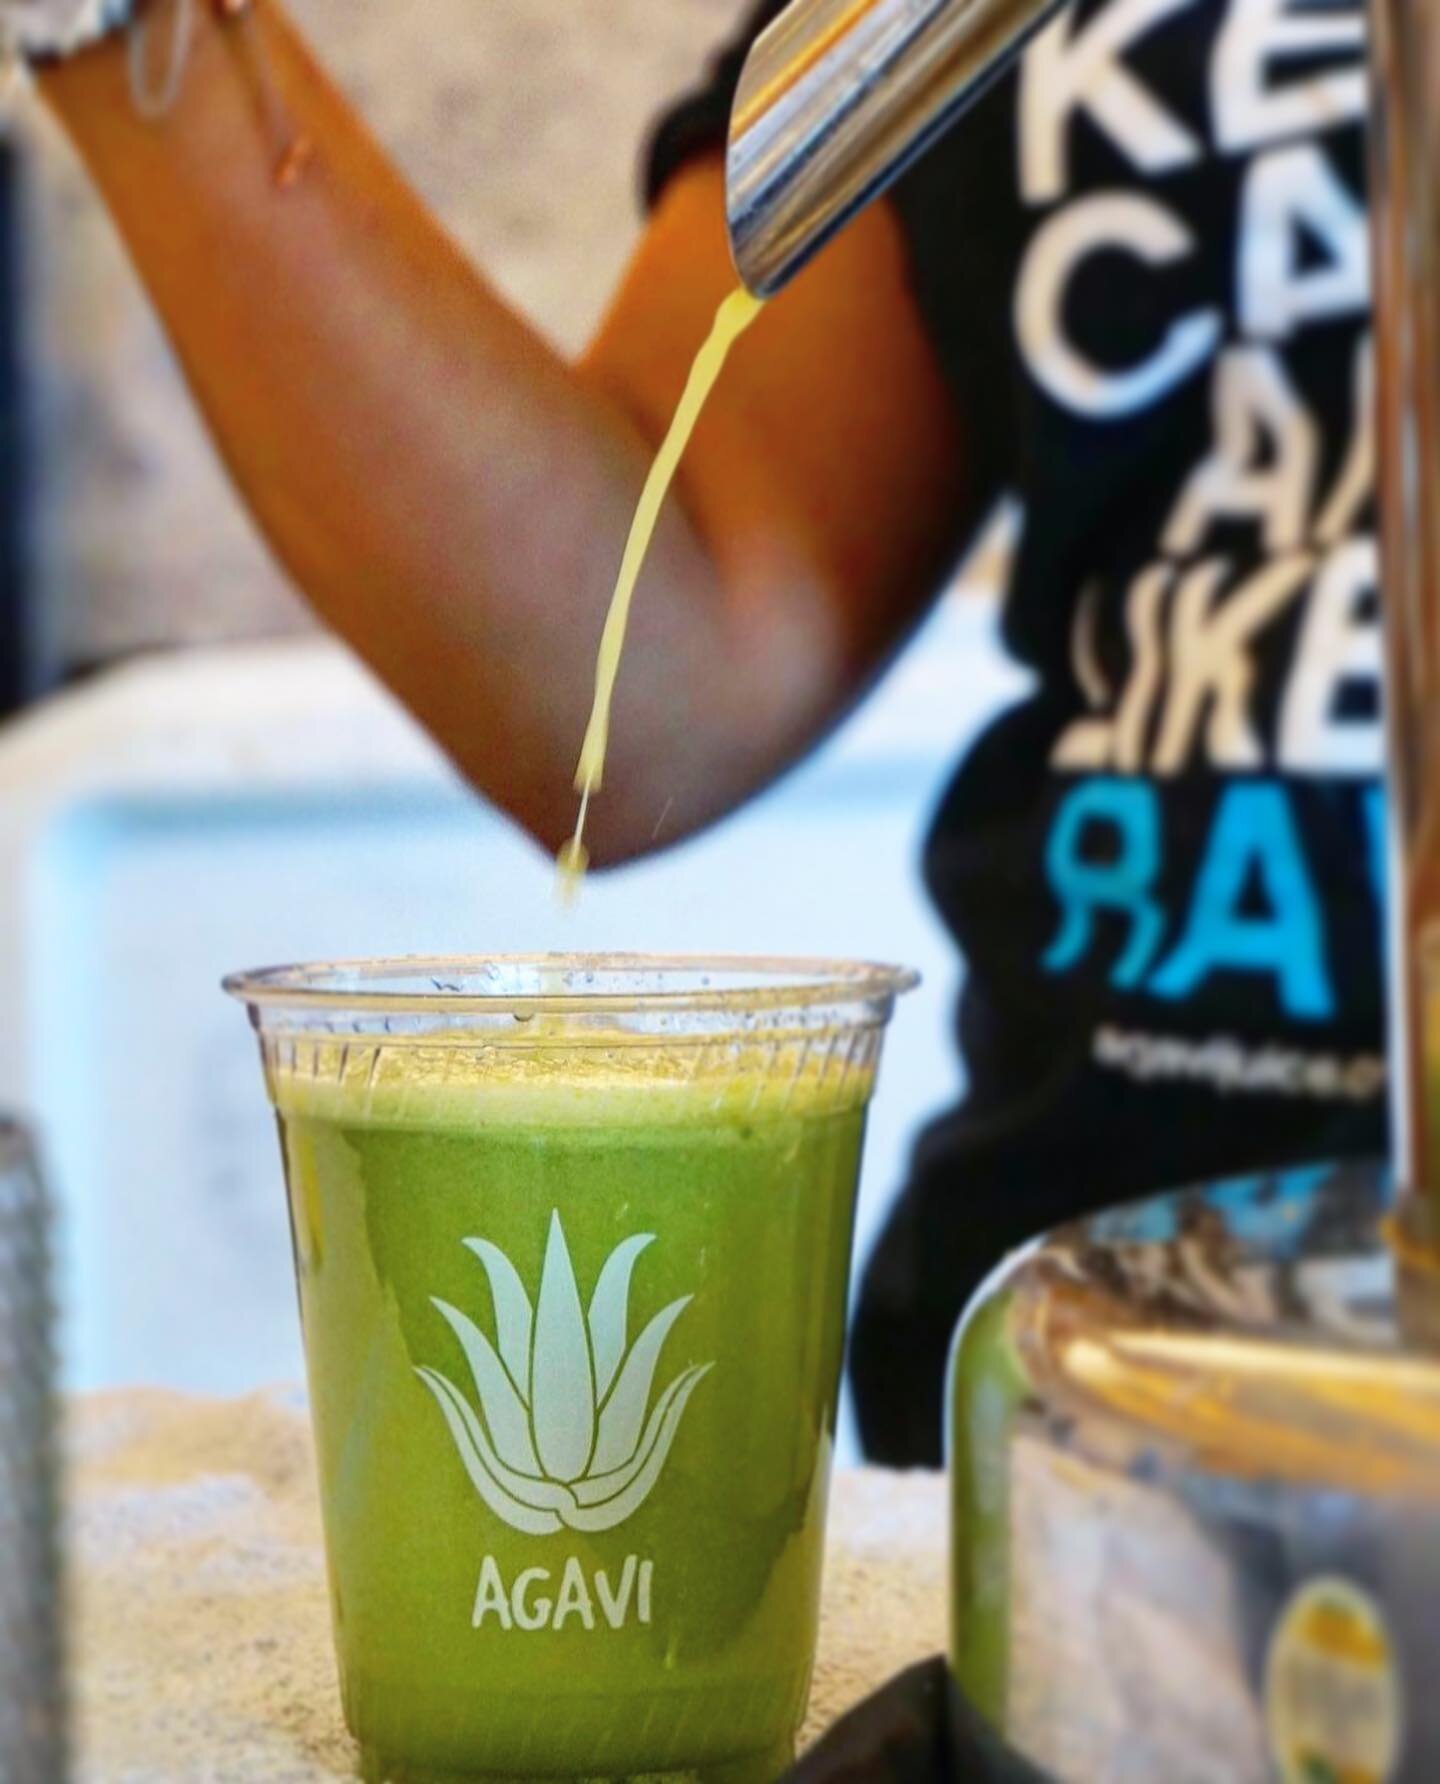 GREEN 💚 GOOD 

📍 EAST VILLAGE
💌 Catering: info@agavijuice.com
✨ 100% Raw 100% Vegan 100% Love
🏳️&zwj;🌈 Proudly serving organic acai bowls &amp; juices!
📸 Tag us in your #AGAVI photos!
.
.
AGAVI JUICE | NYC
#agavijuice 💚 #agavinyc
#agavi #nyc #